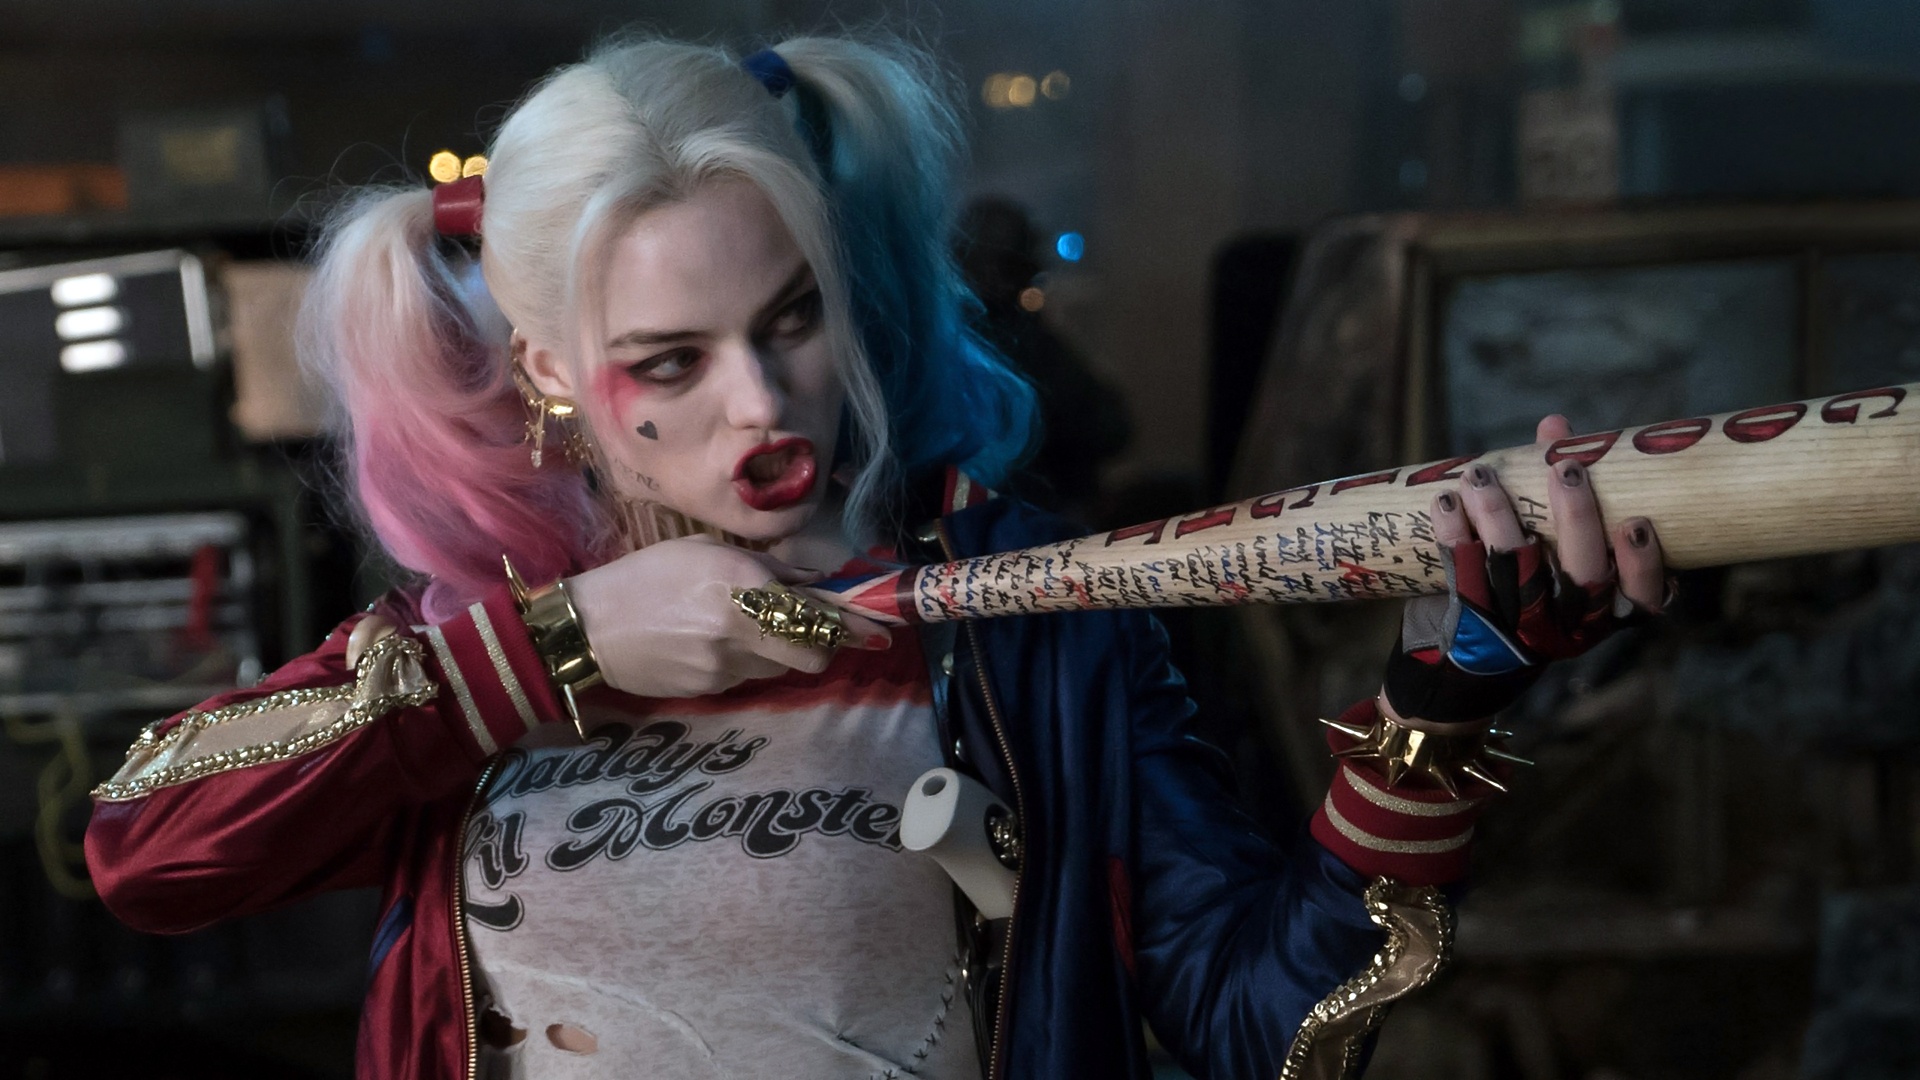 The Suicide Squad: Did James Gunn Confirm Harley Quinn’s Return?